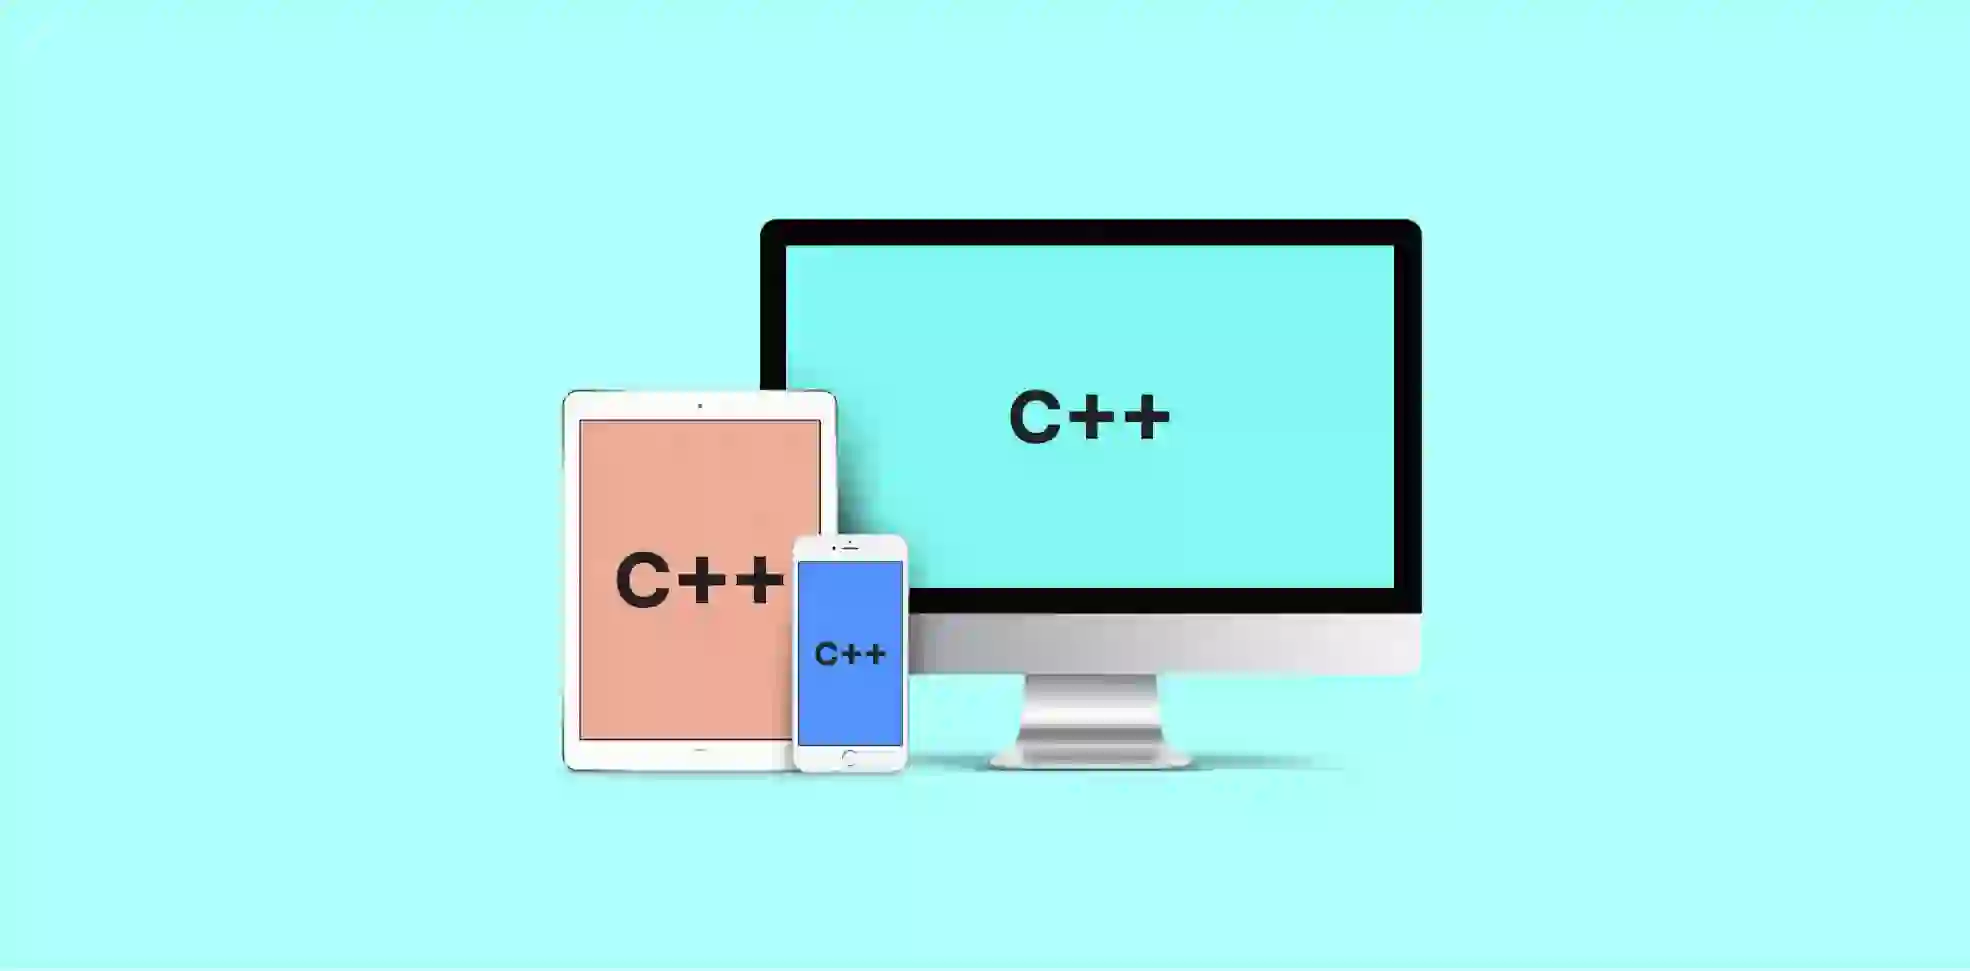 C++ is written on screens of a monitor, a tablet, a smartphone on aqua background